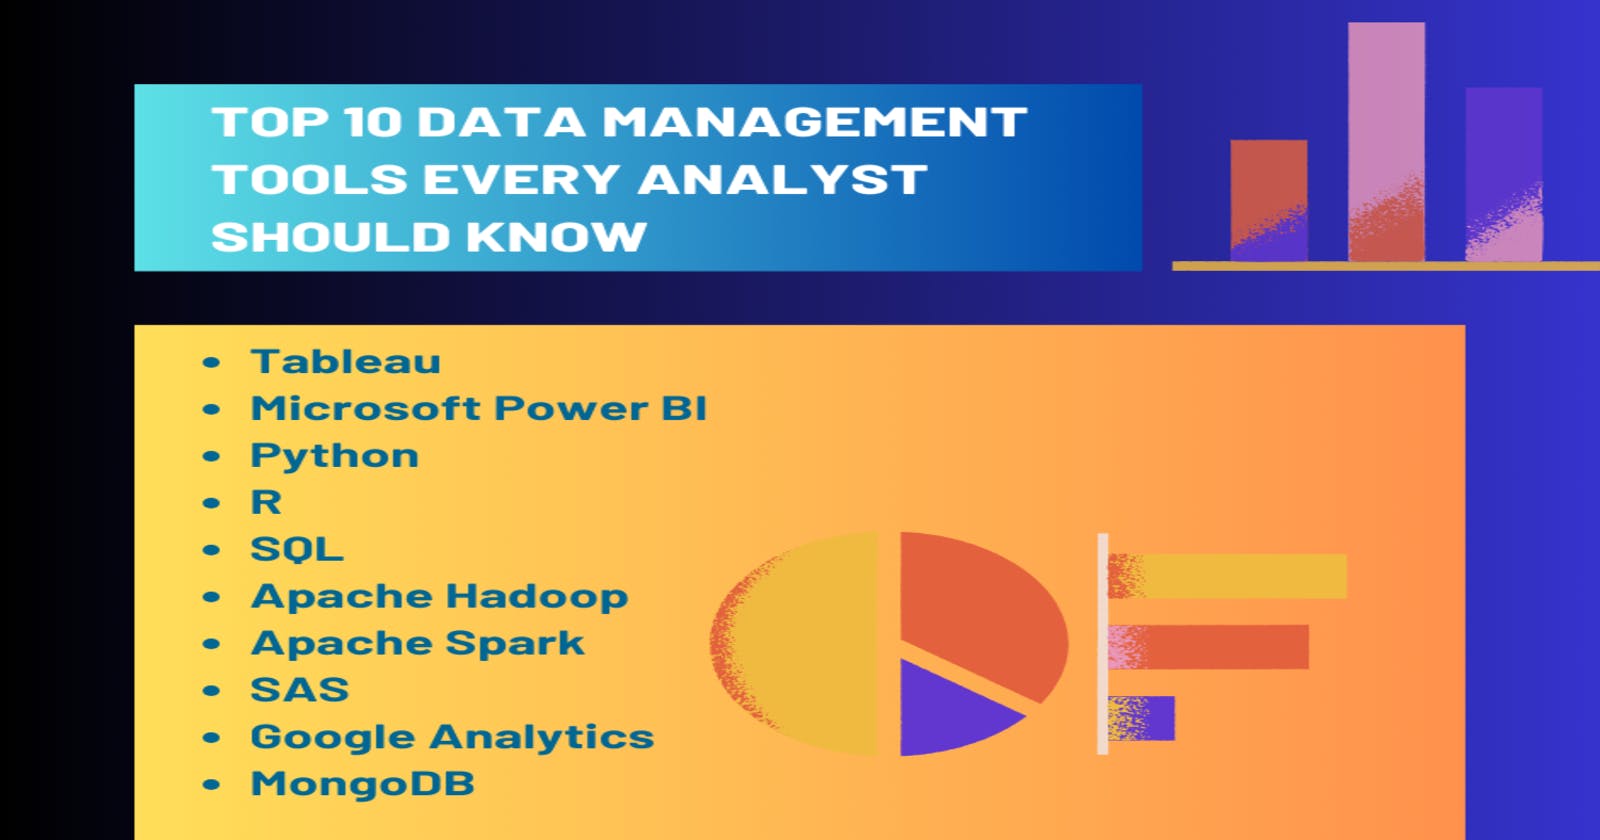 Top 10 Data Management Tools Every Analyst Should Know